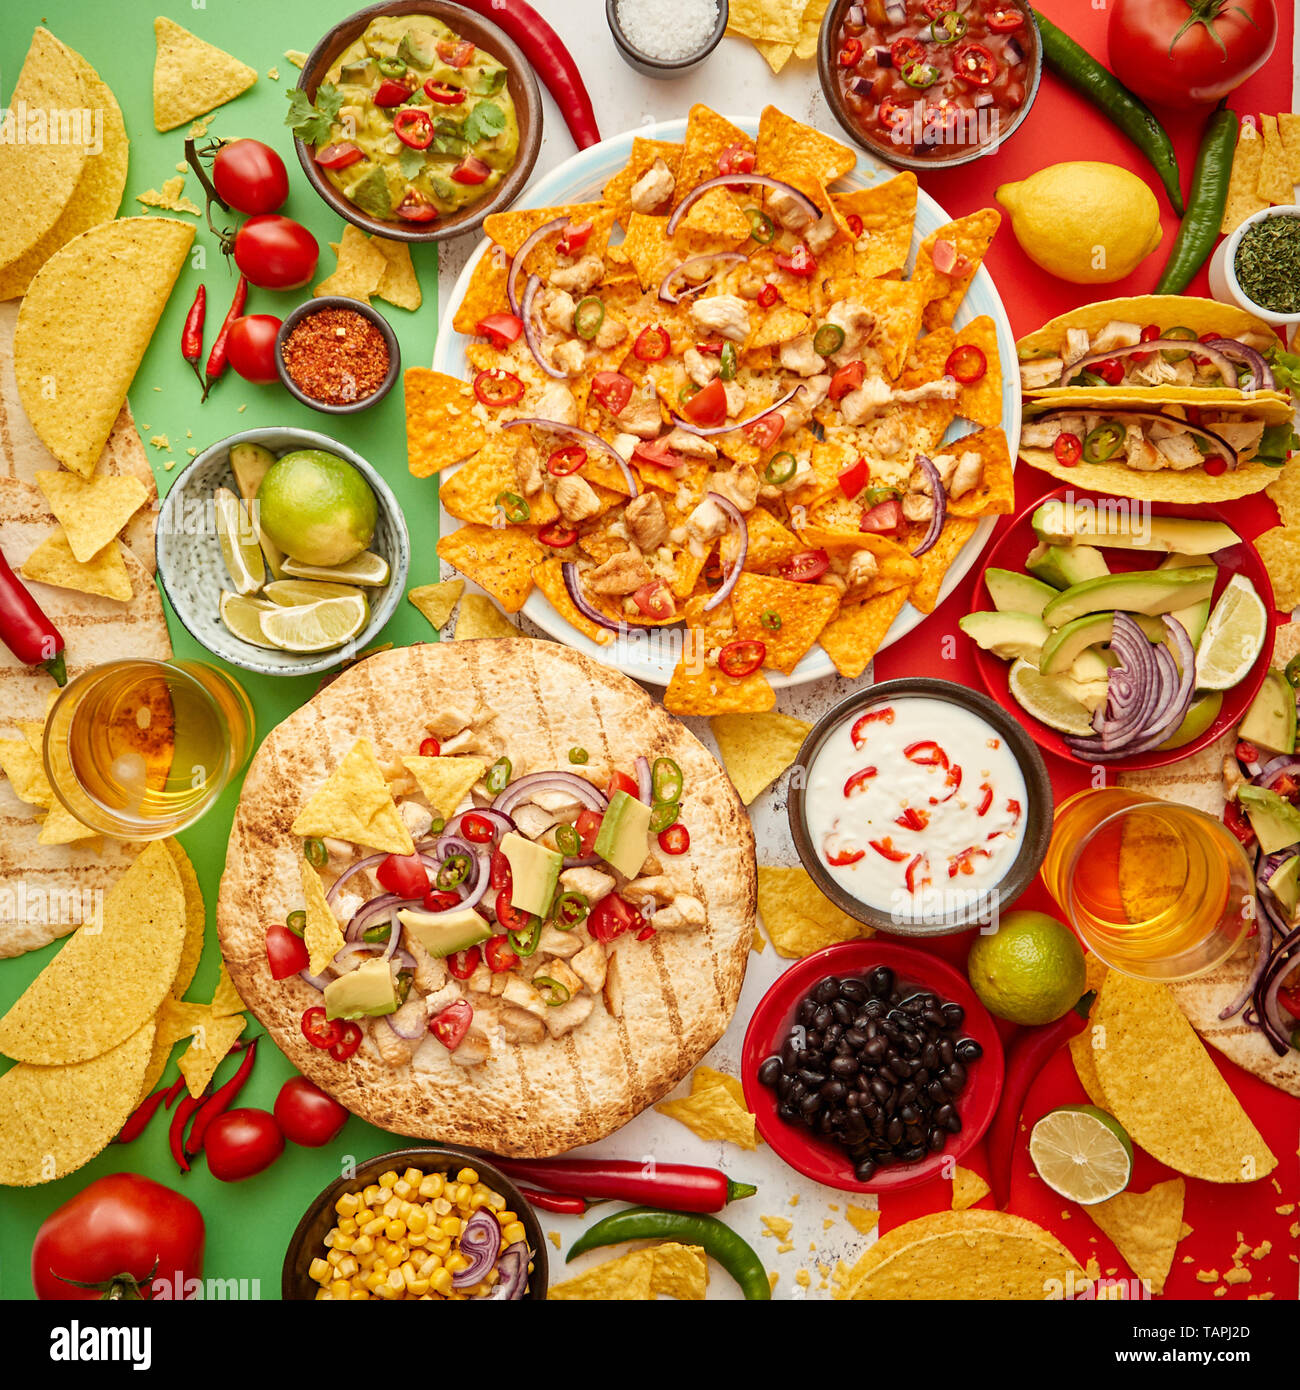 An overhead photo of an assortment of many different Mexican foods, including tacos, guacamole, nachos with grilled chicken, tortillas, salsas and oth Stock Photo